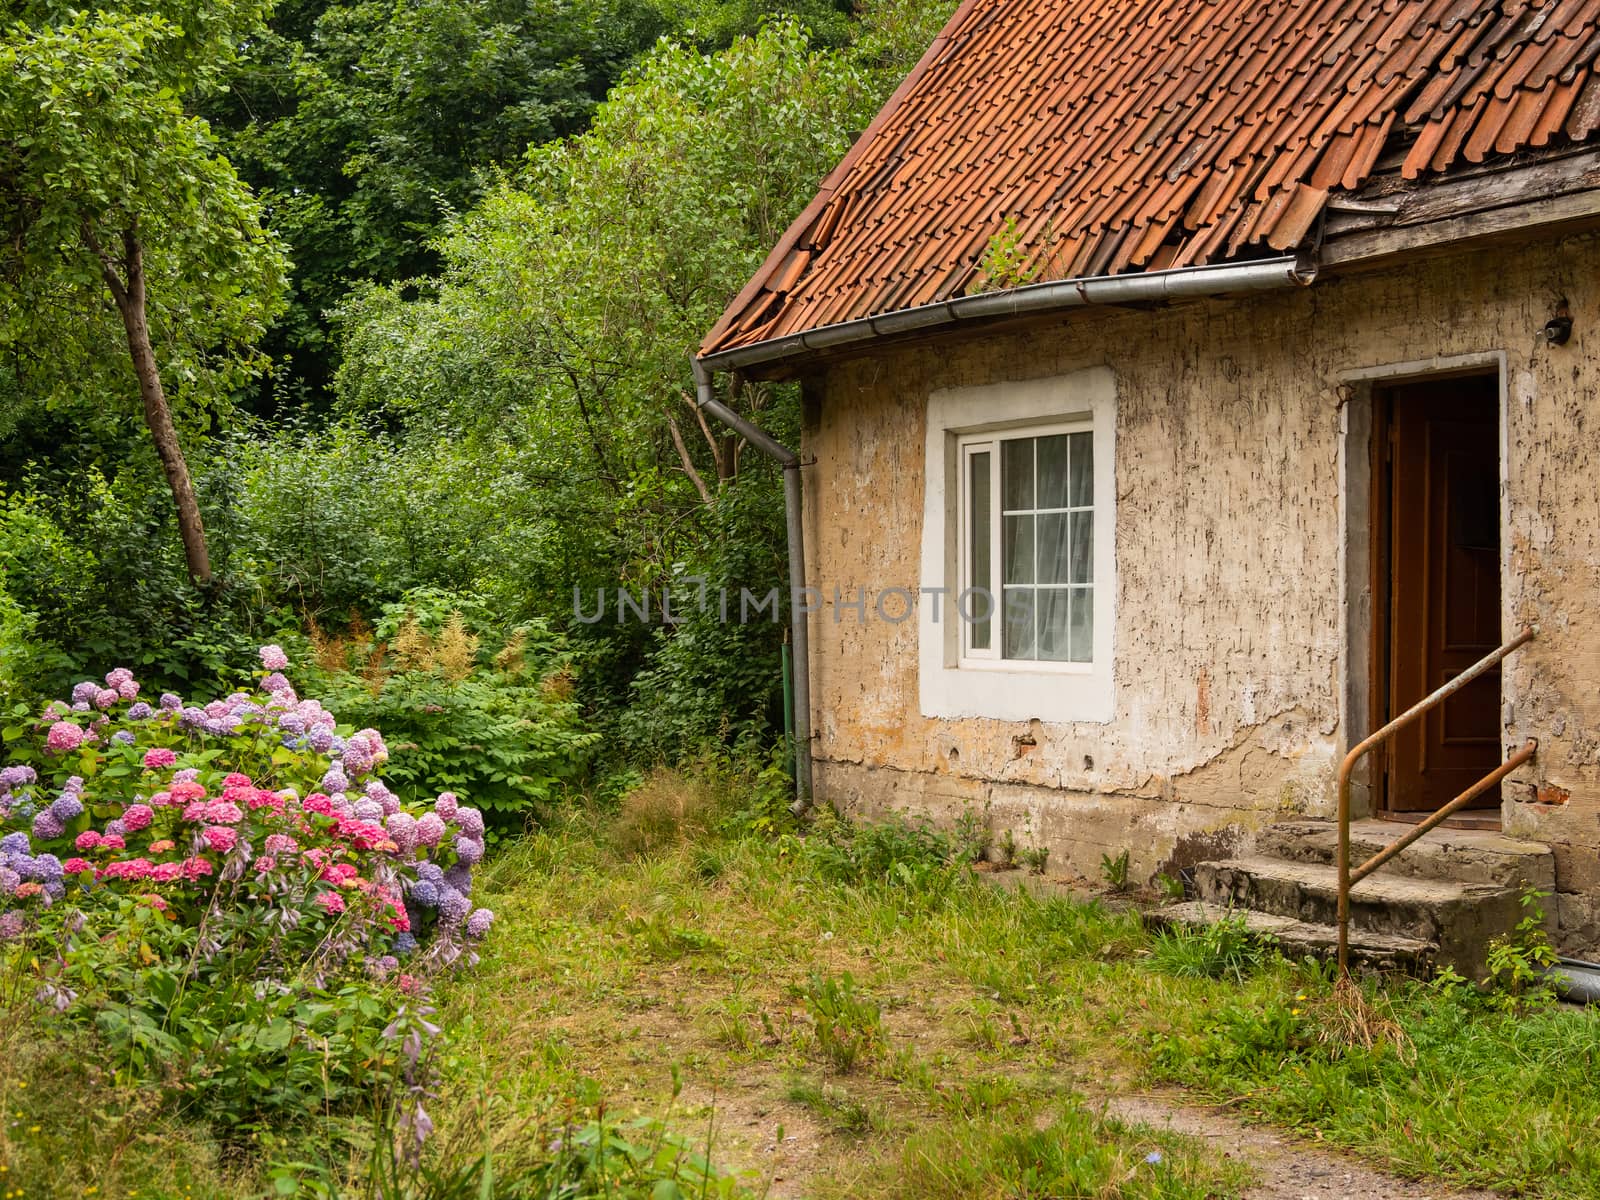 Picturesque old country house with tiled roof . Neglected garden with big bushes of colorful hydrangea flowers.